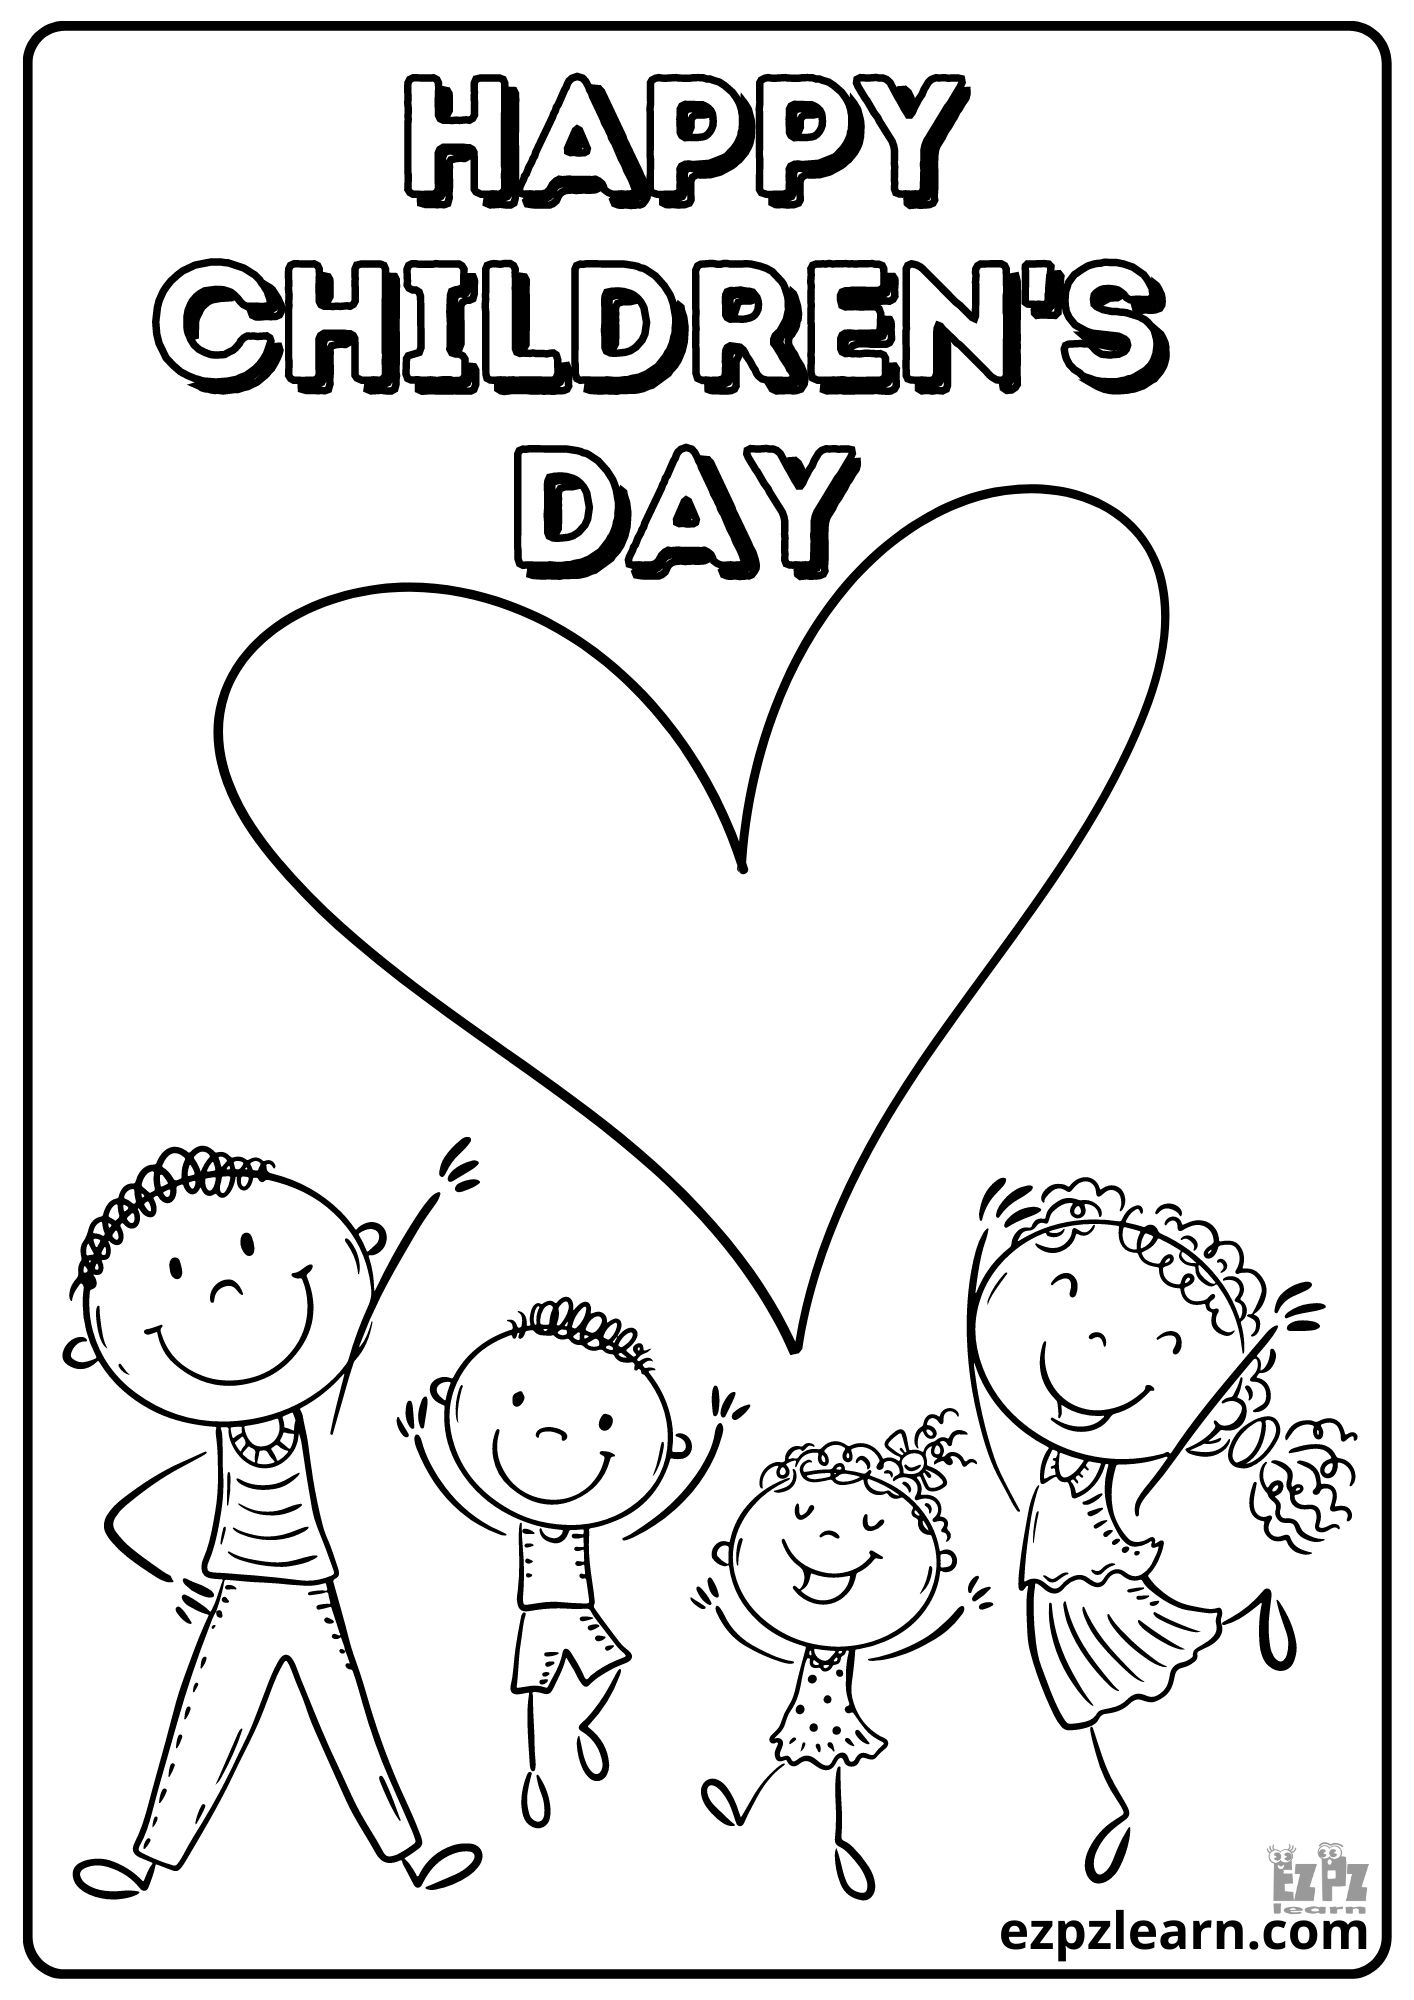 Children's Day coloring pages - Topcoloringpages.net